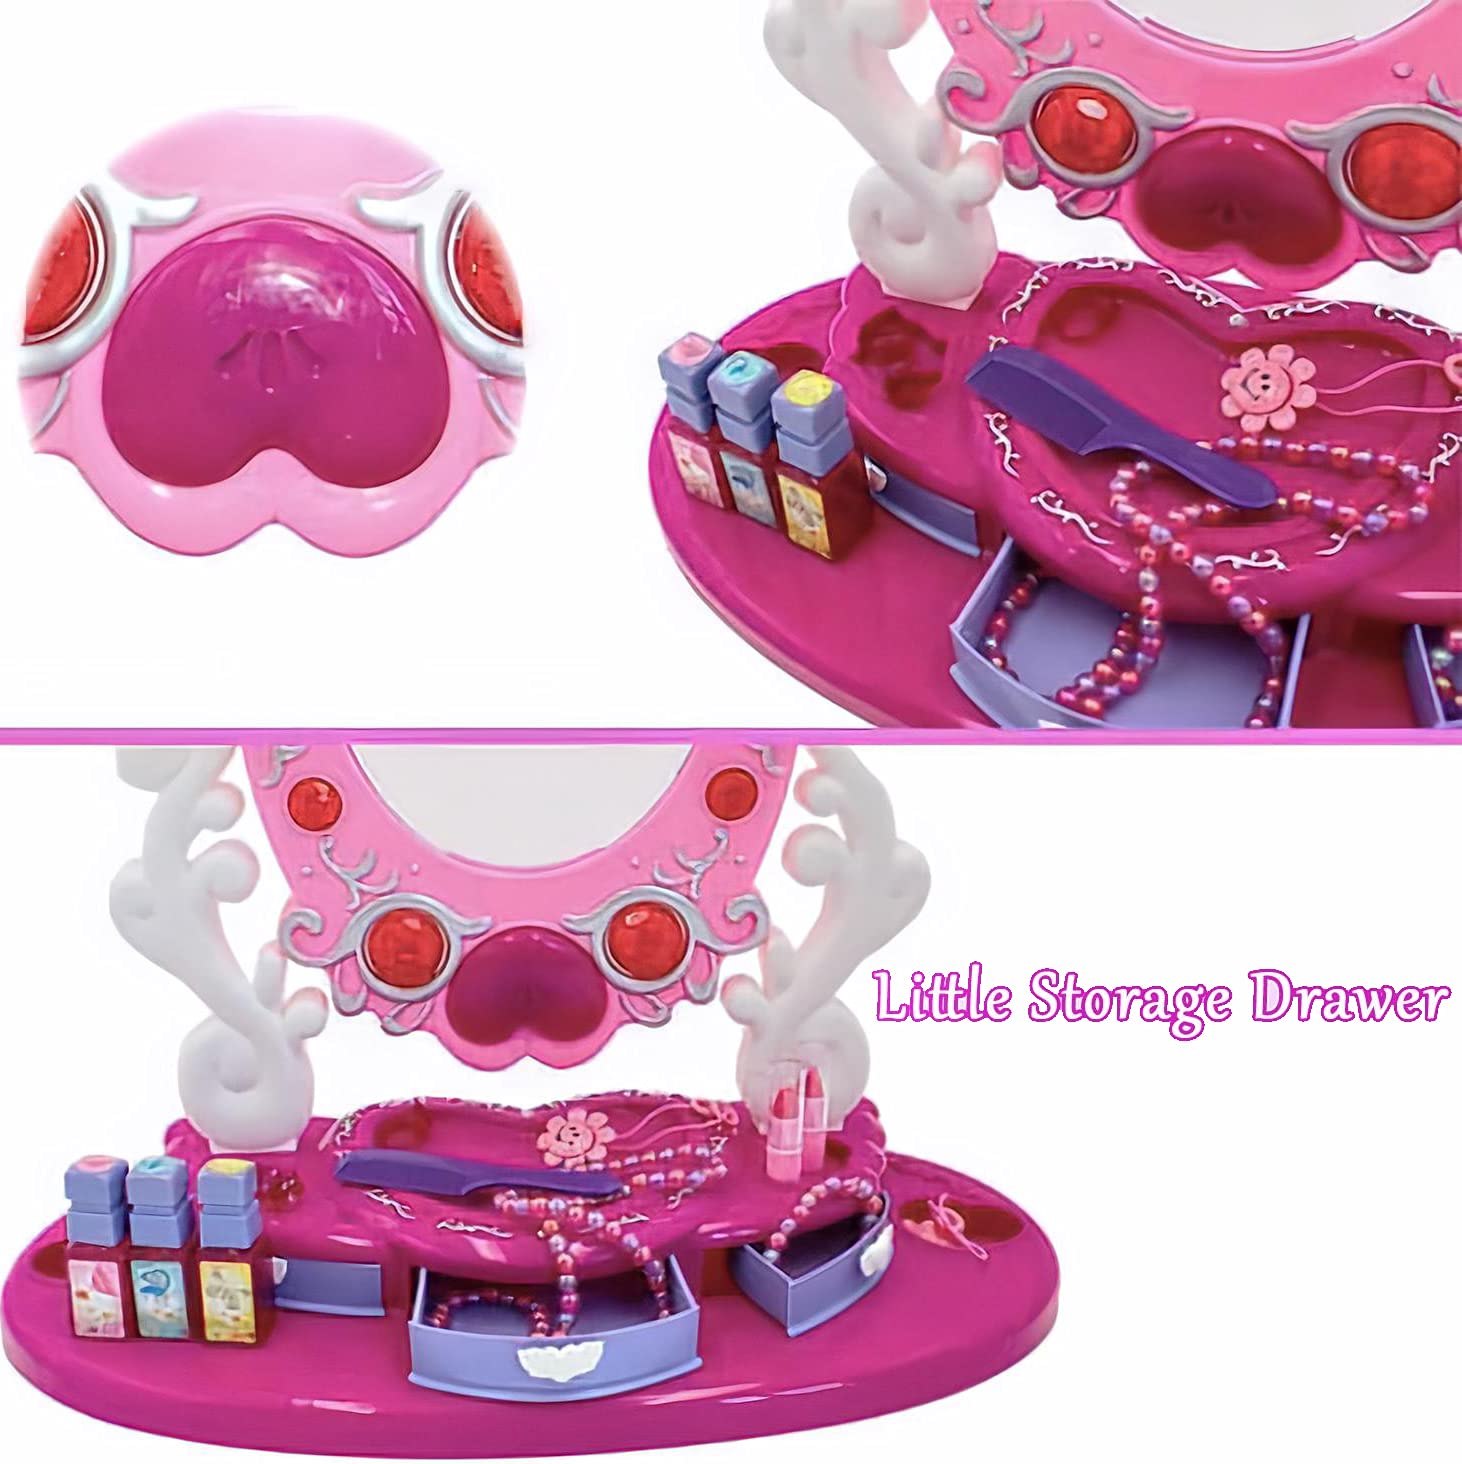 Dresser Vanity Beauty Set - Pink Princess Pretend Play Dressing Table Top Set with Makeup Mirror, Jewelry and Accessories - Music and Lights for Little Girls